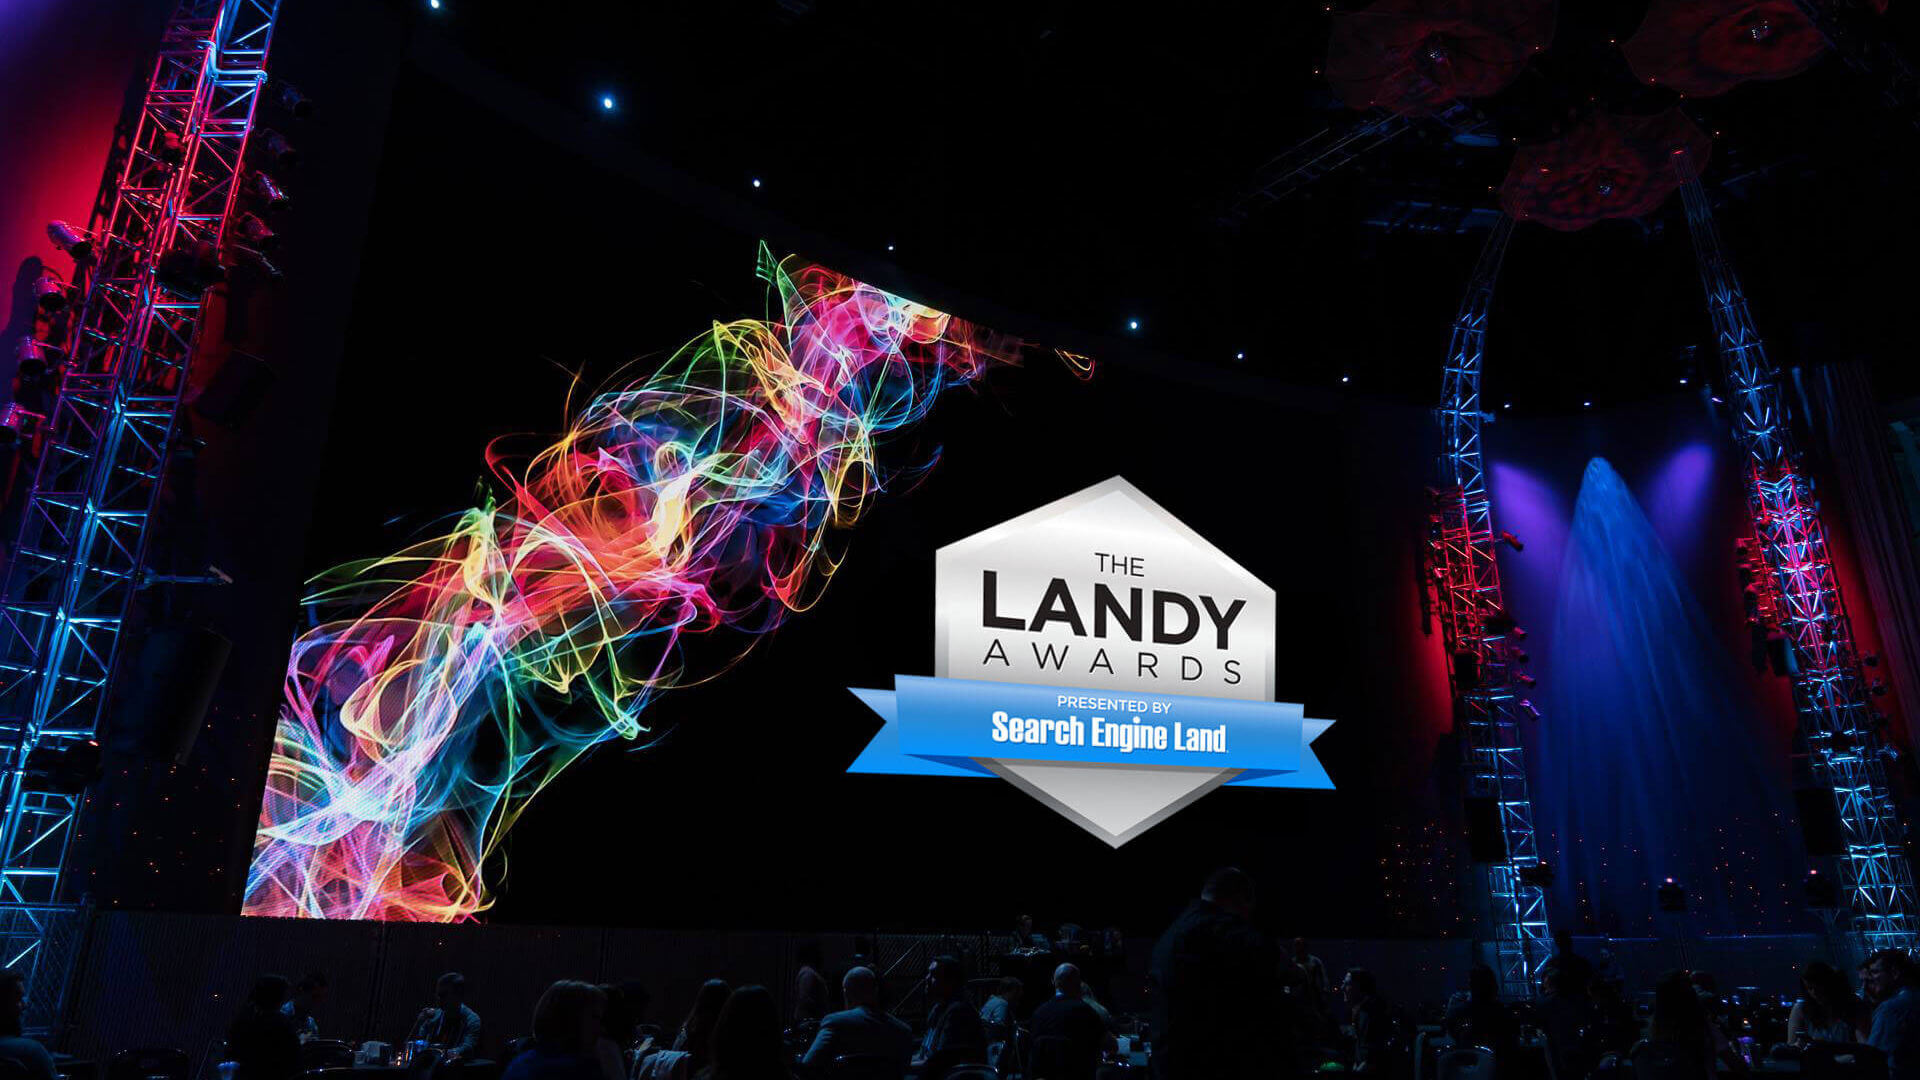 Final call to enter the 2019 Search Engine Land Awards